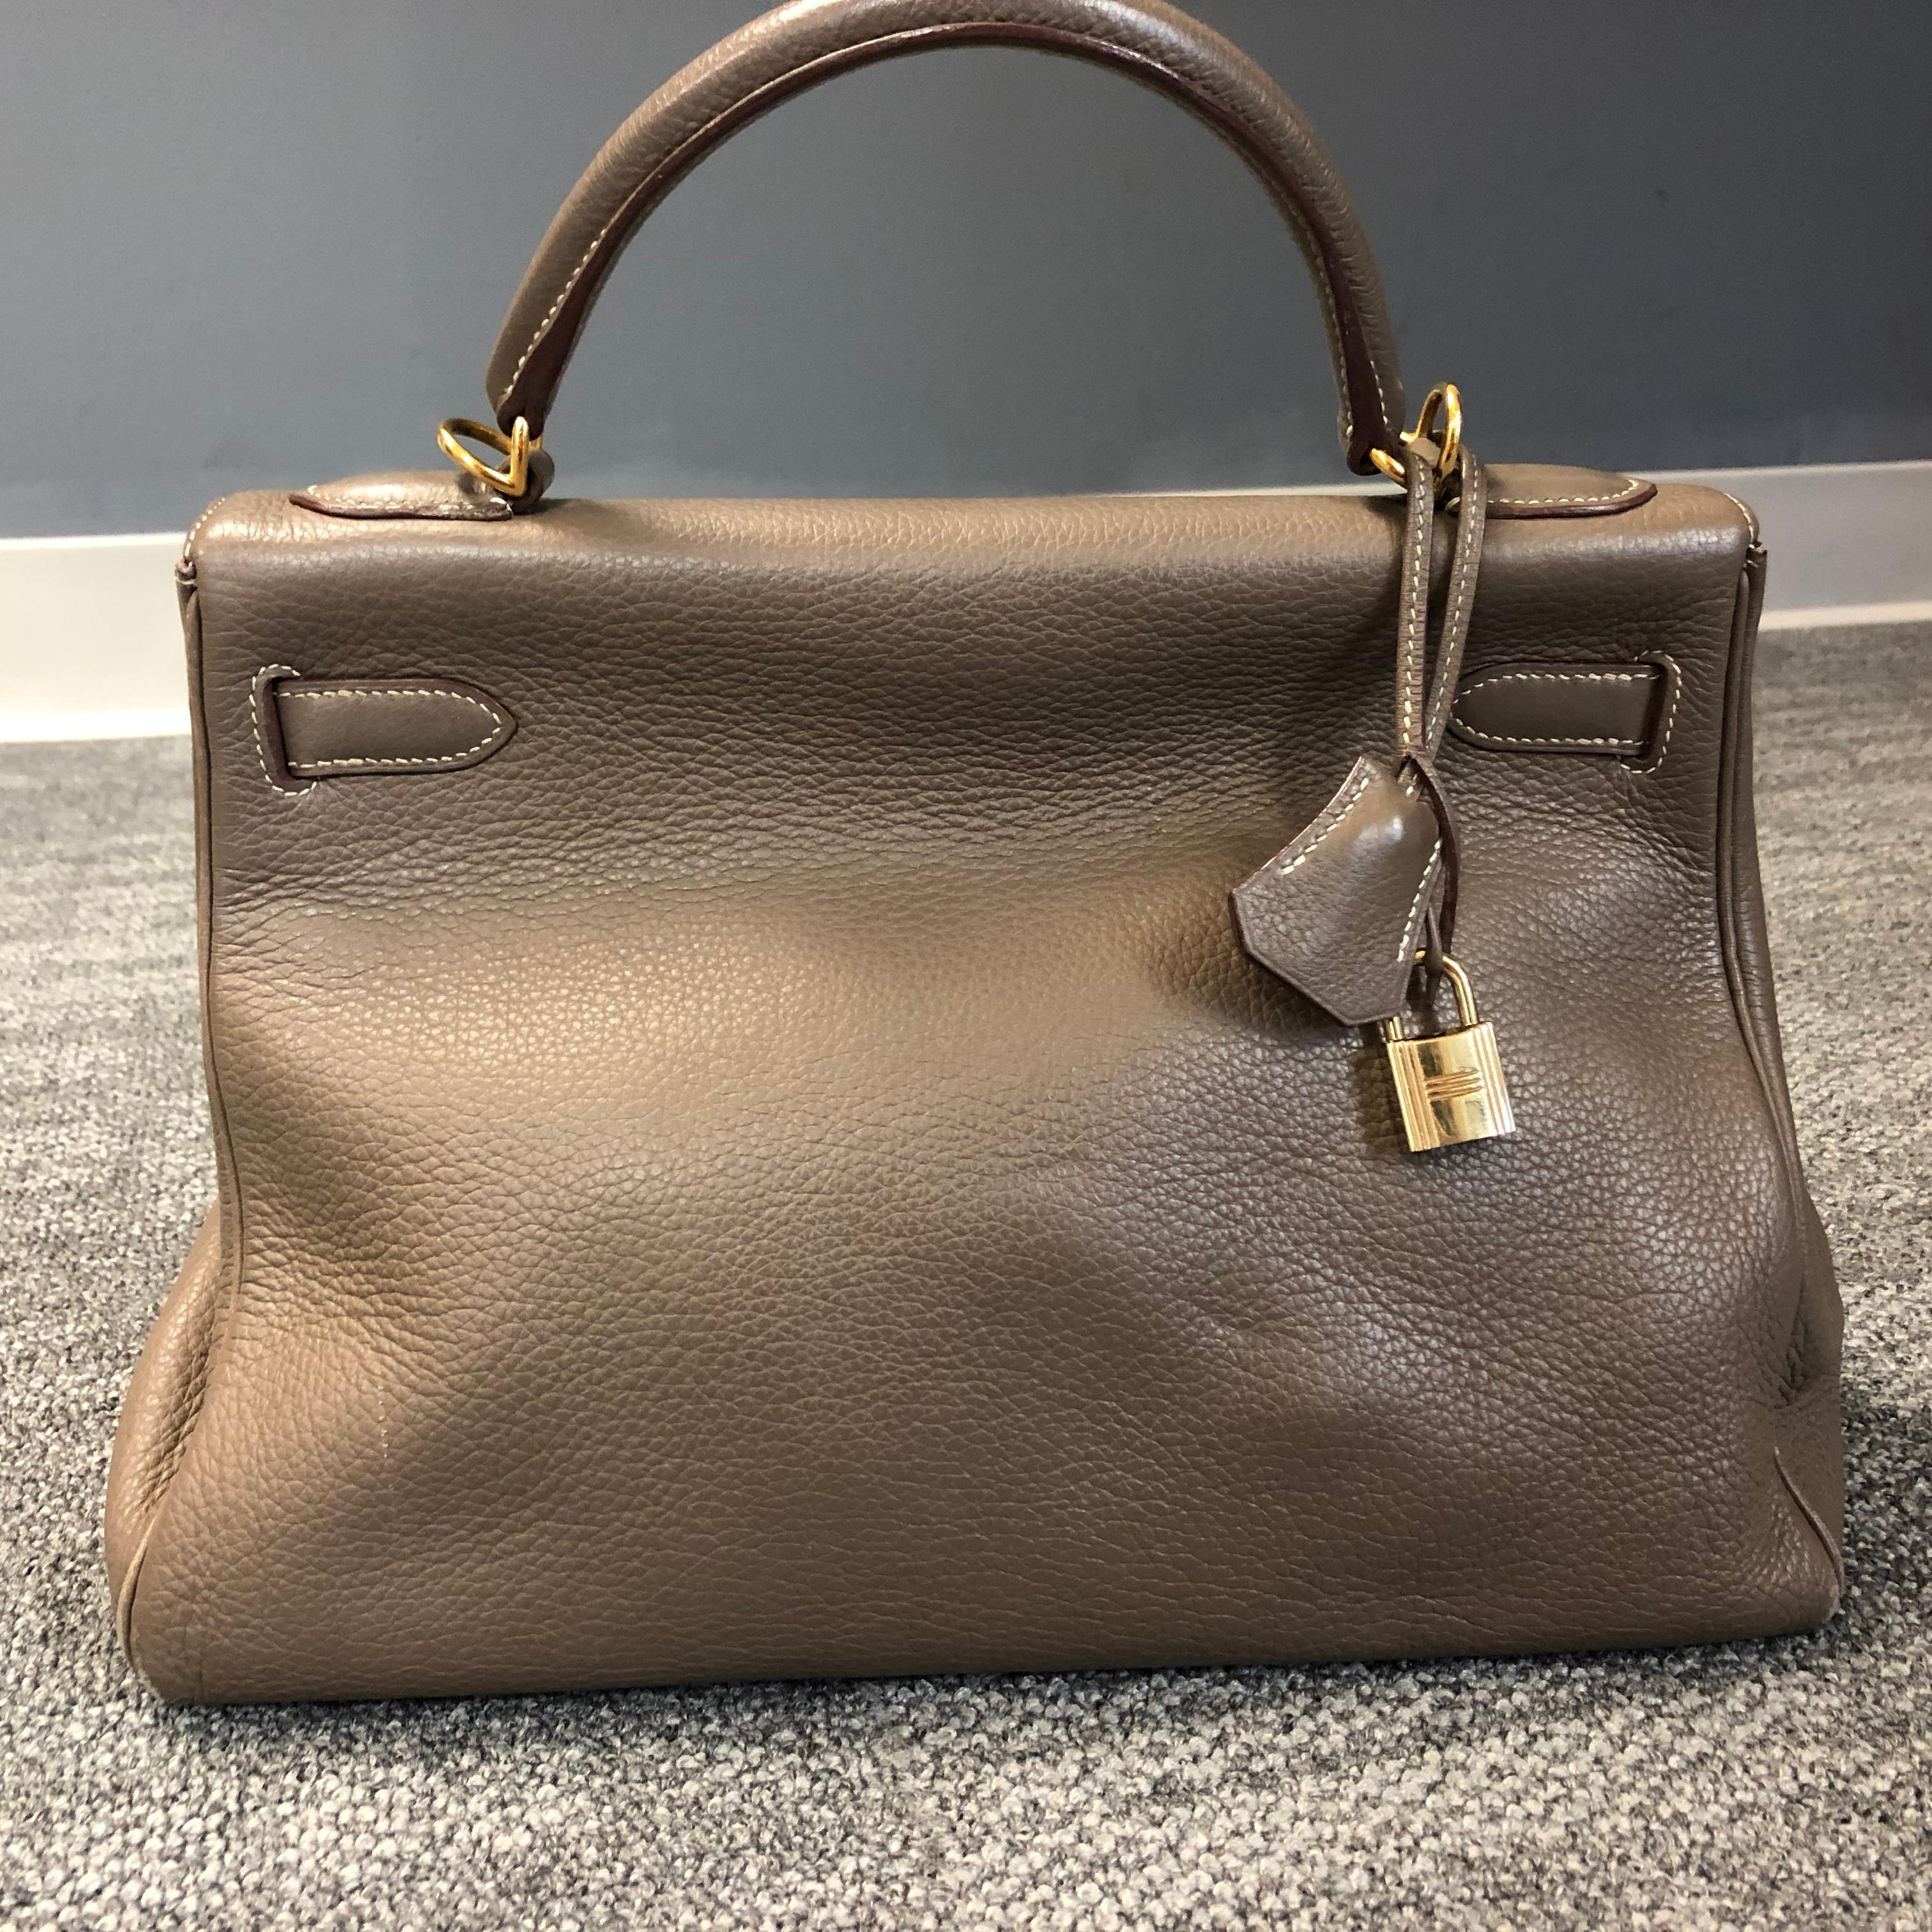 This is the Hermès Kelly Sellier Bag 32 crafted of Epsom leather.

On the inside there are three flat pockets, one of them has a Hermès zipper with a leather tab. The tab has to be in a straight line with the zipper, this tells us it's